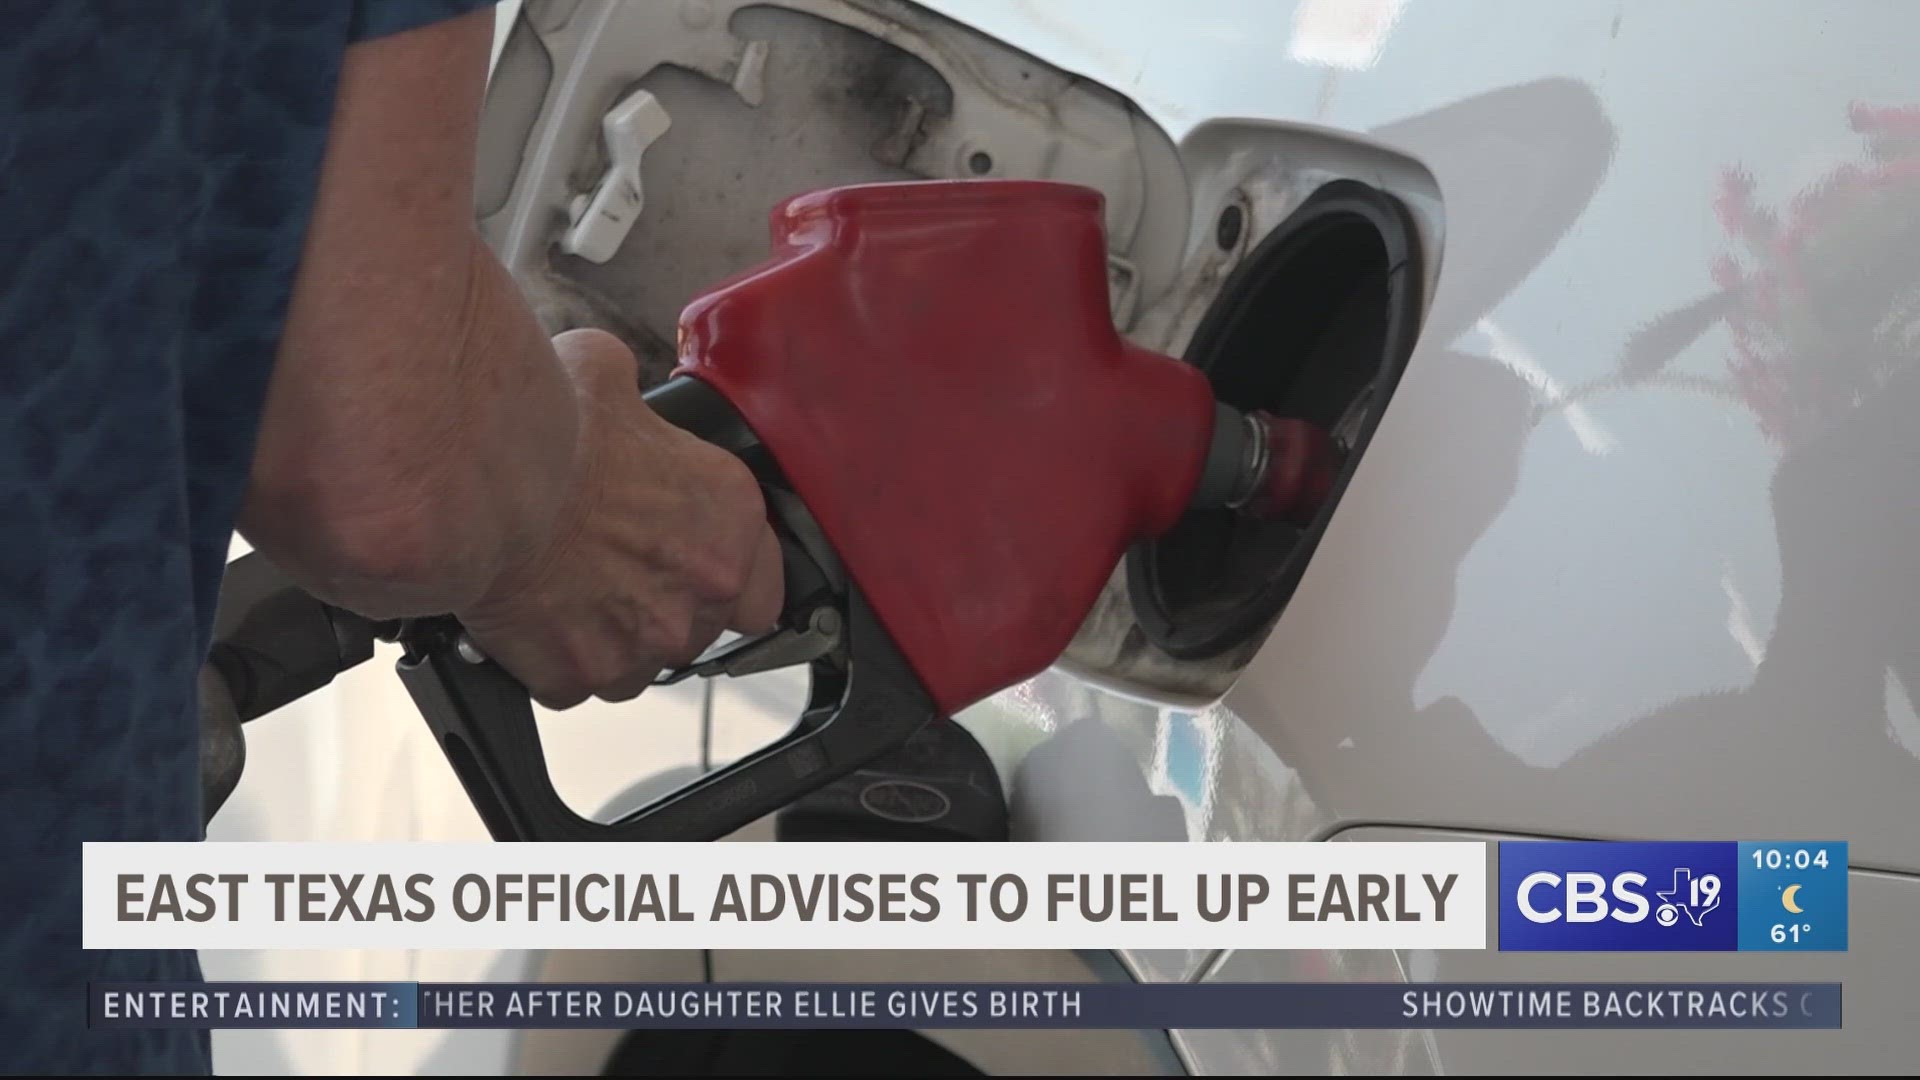 Smith County Emergency Management Coordinator Brandon Moore said locals should expect a fuel shortage.